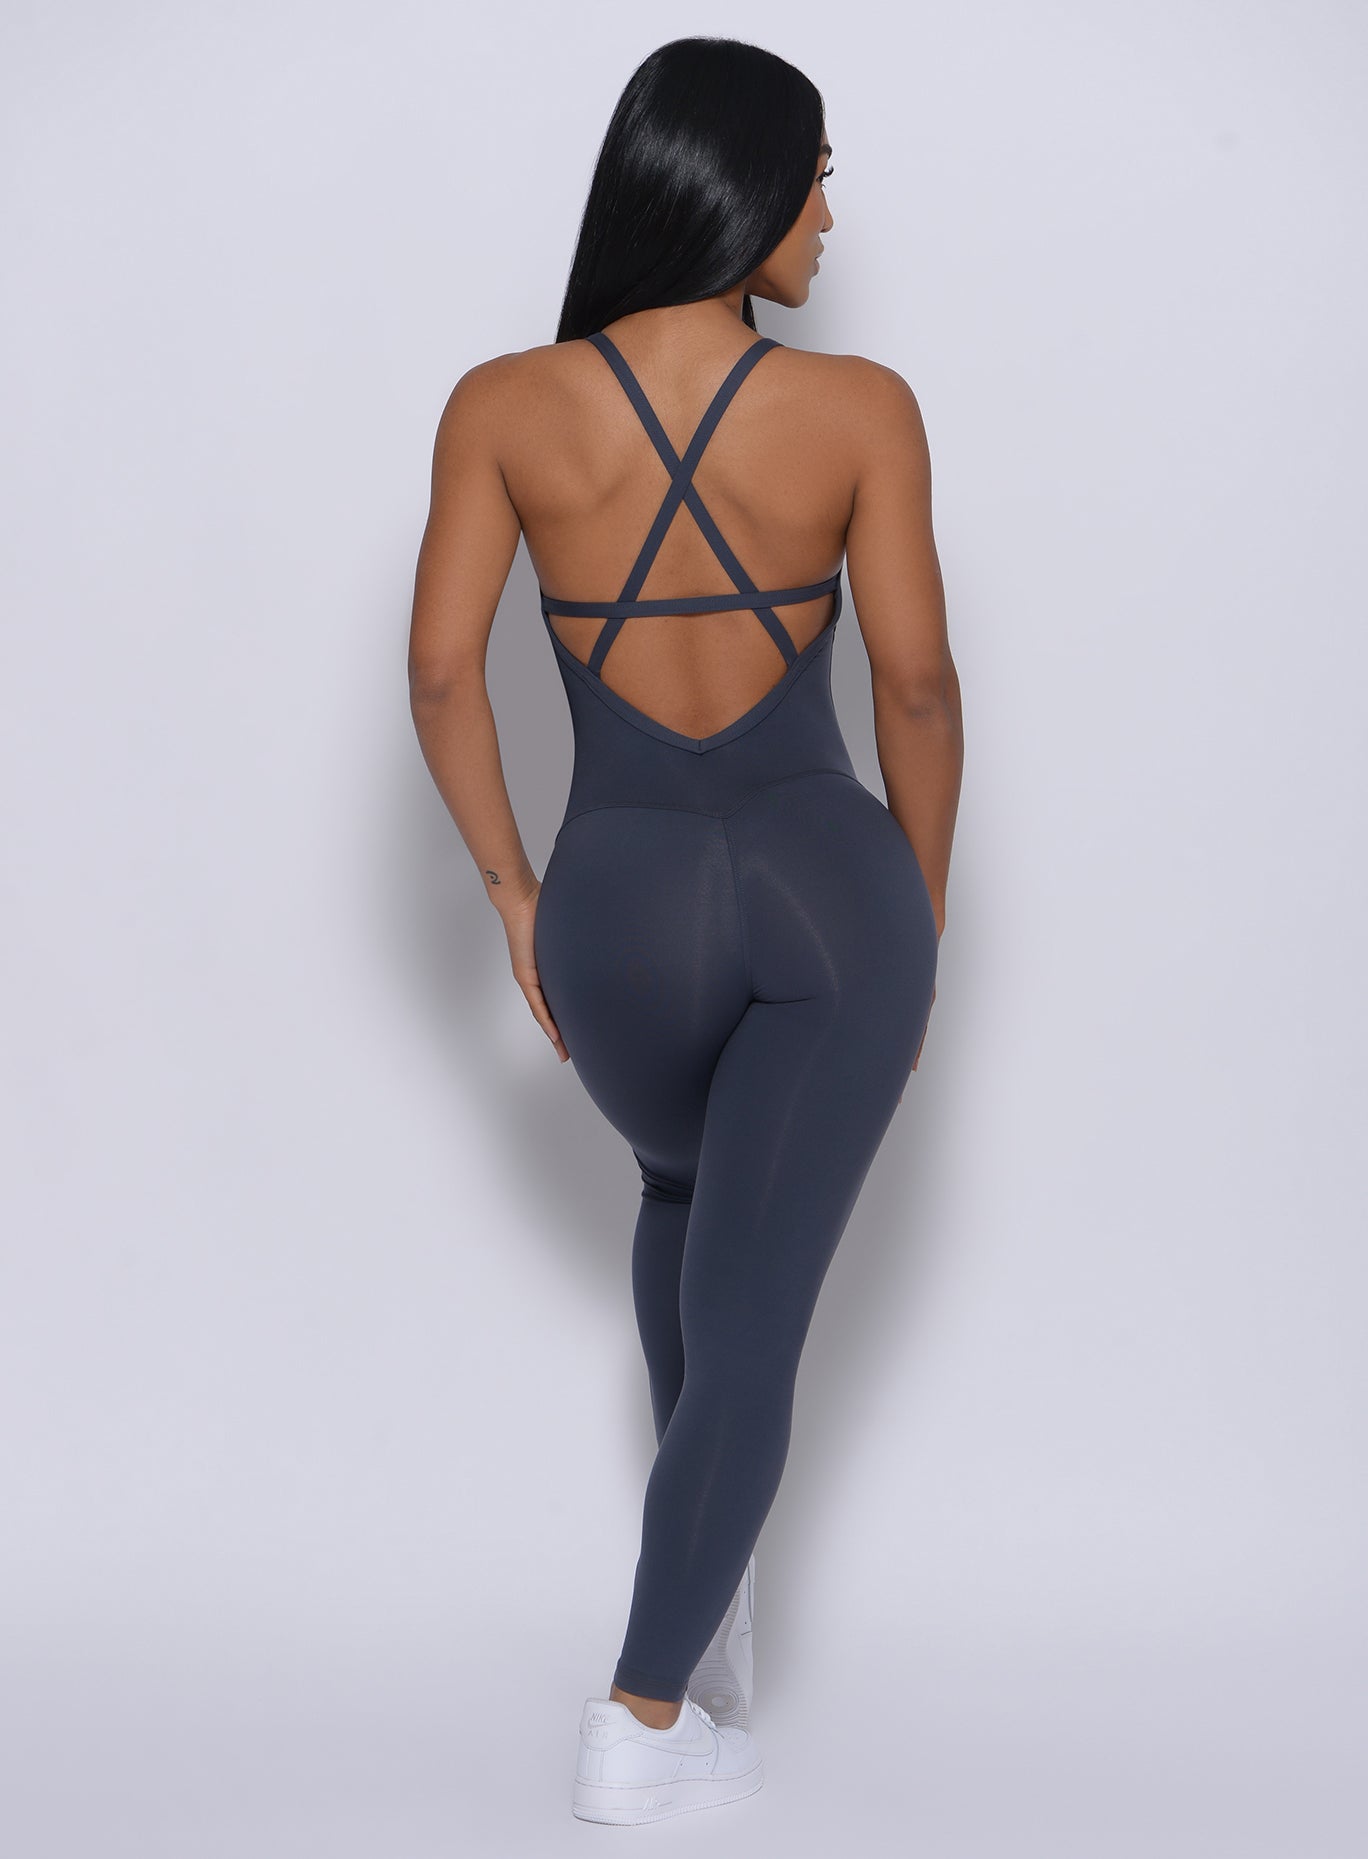 Back profile picture of a model in our sculpted bodysuit in summit gray color